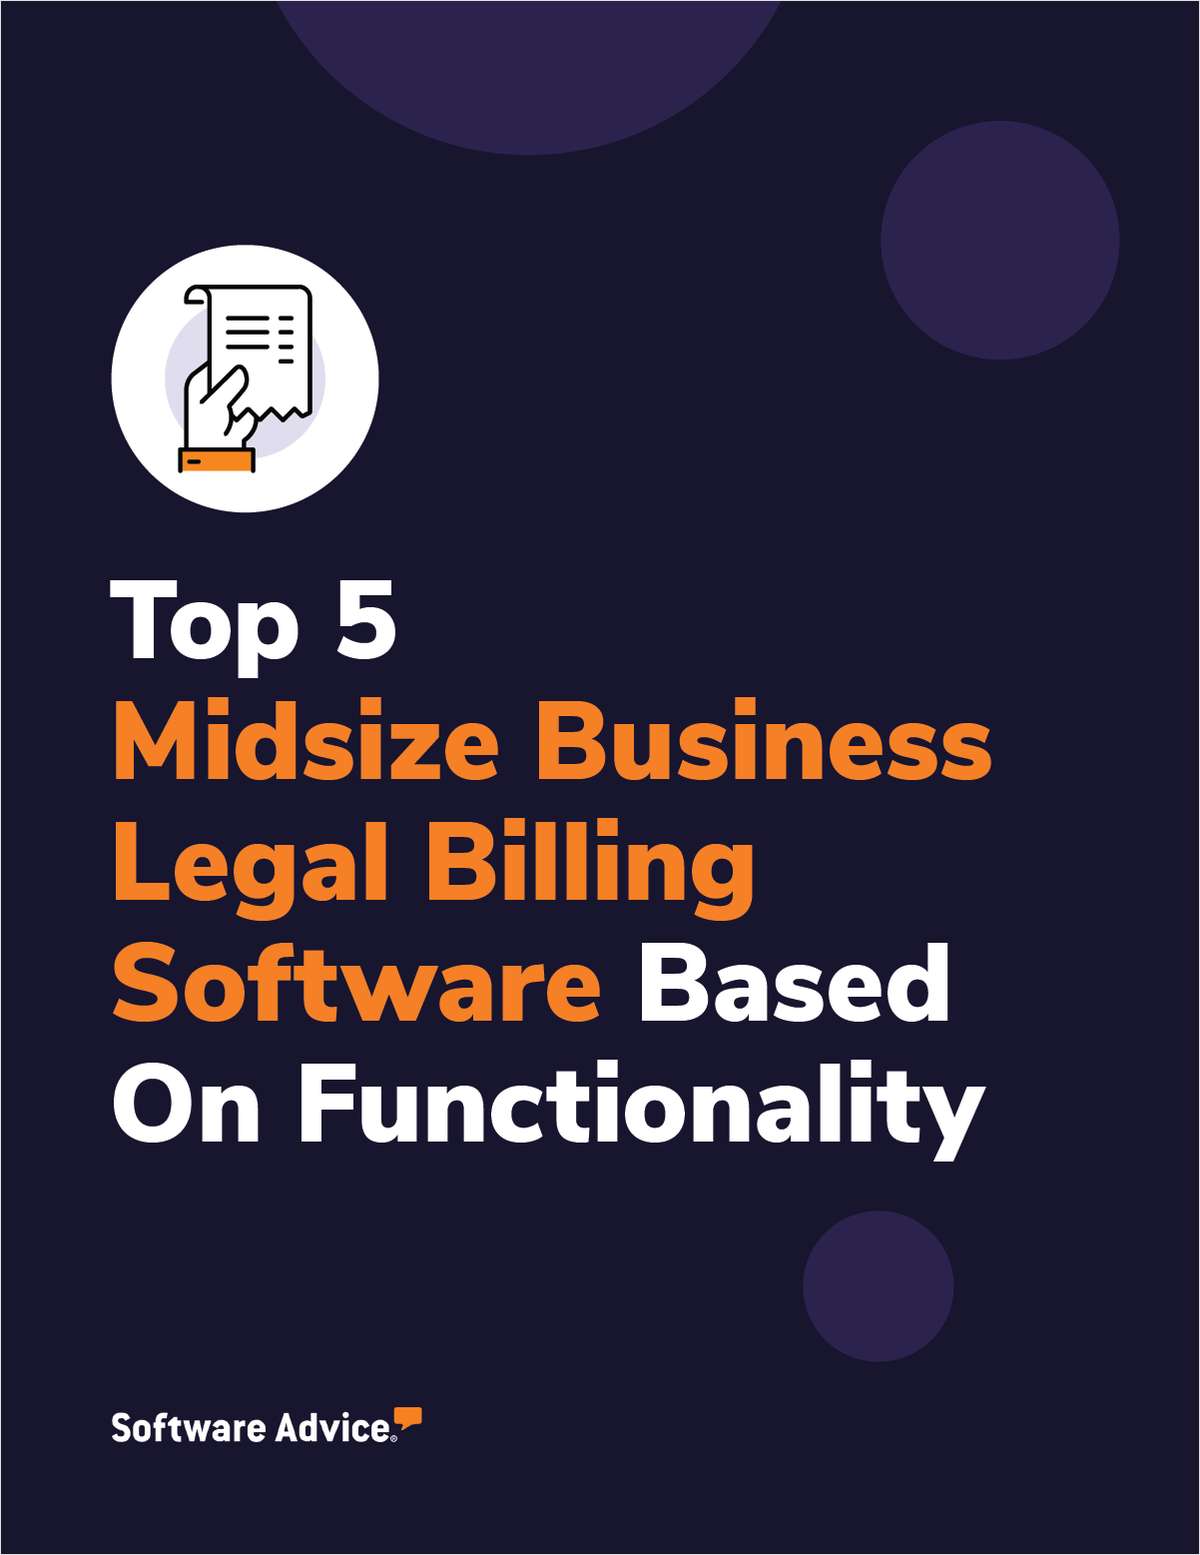 Top 5 Midsize Business Legal Billing Software With the Best User Reviewed Functionality